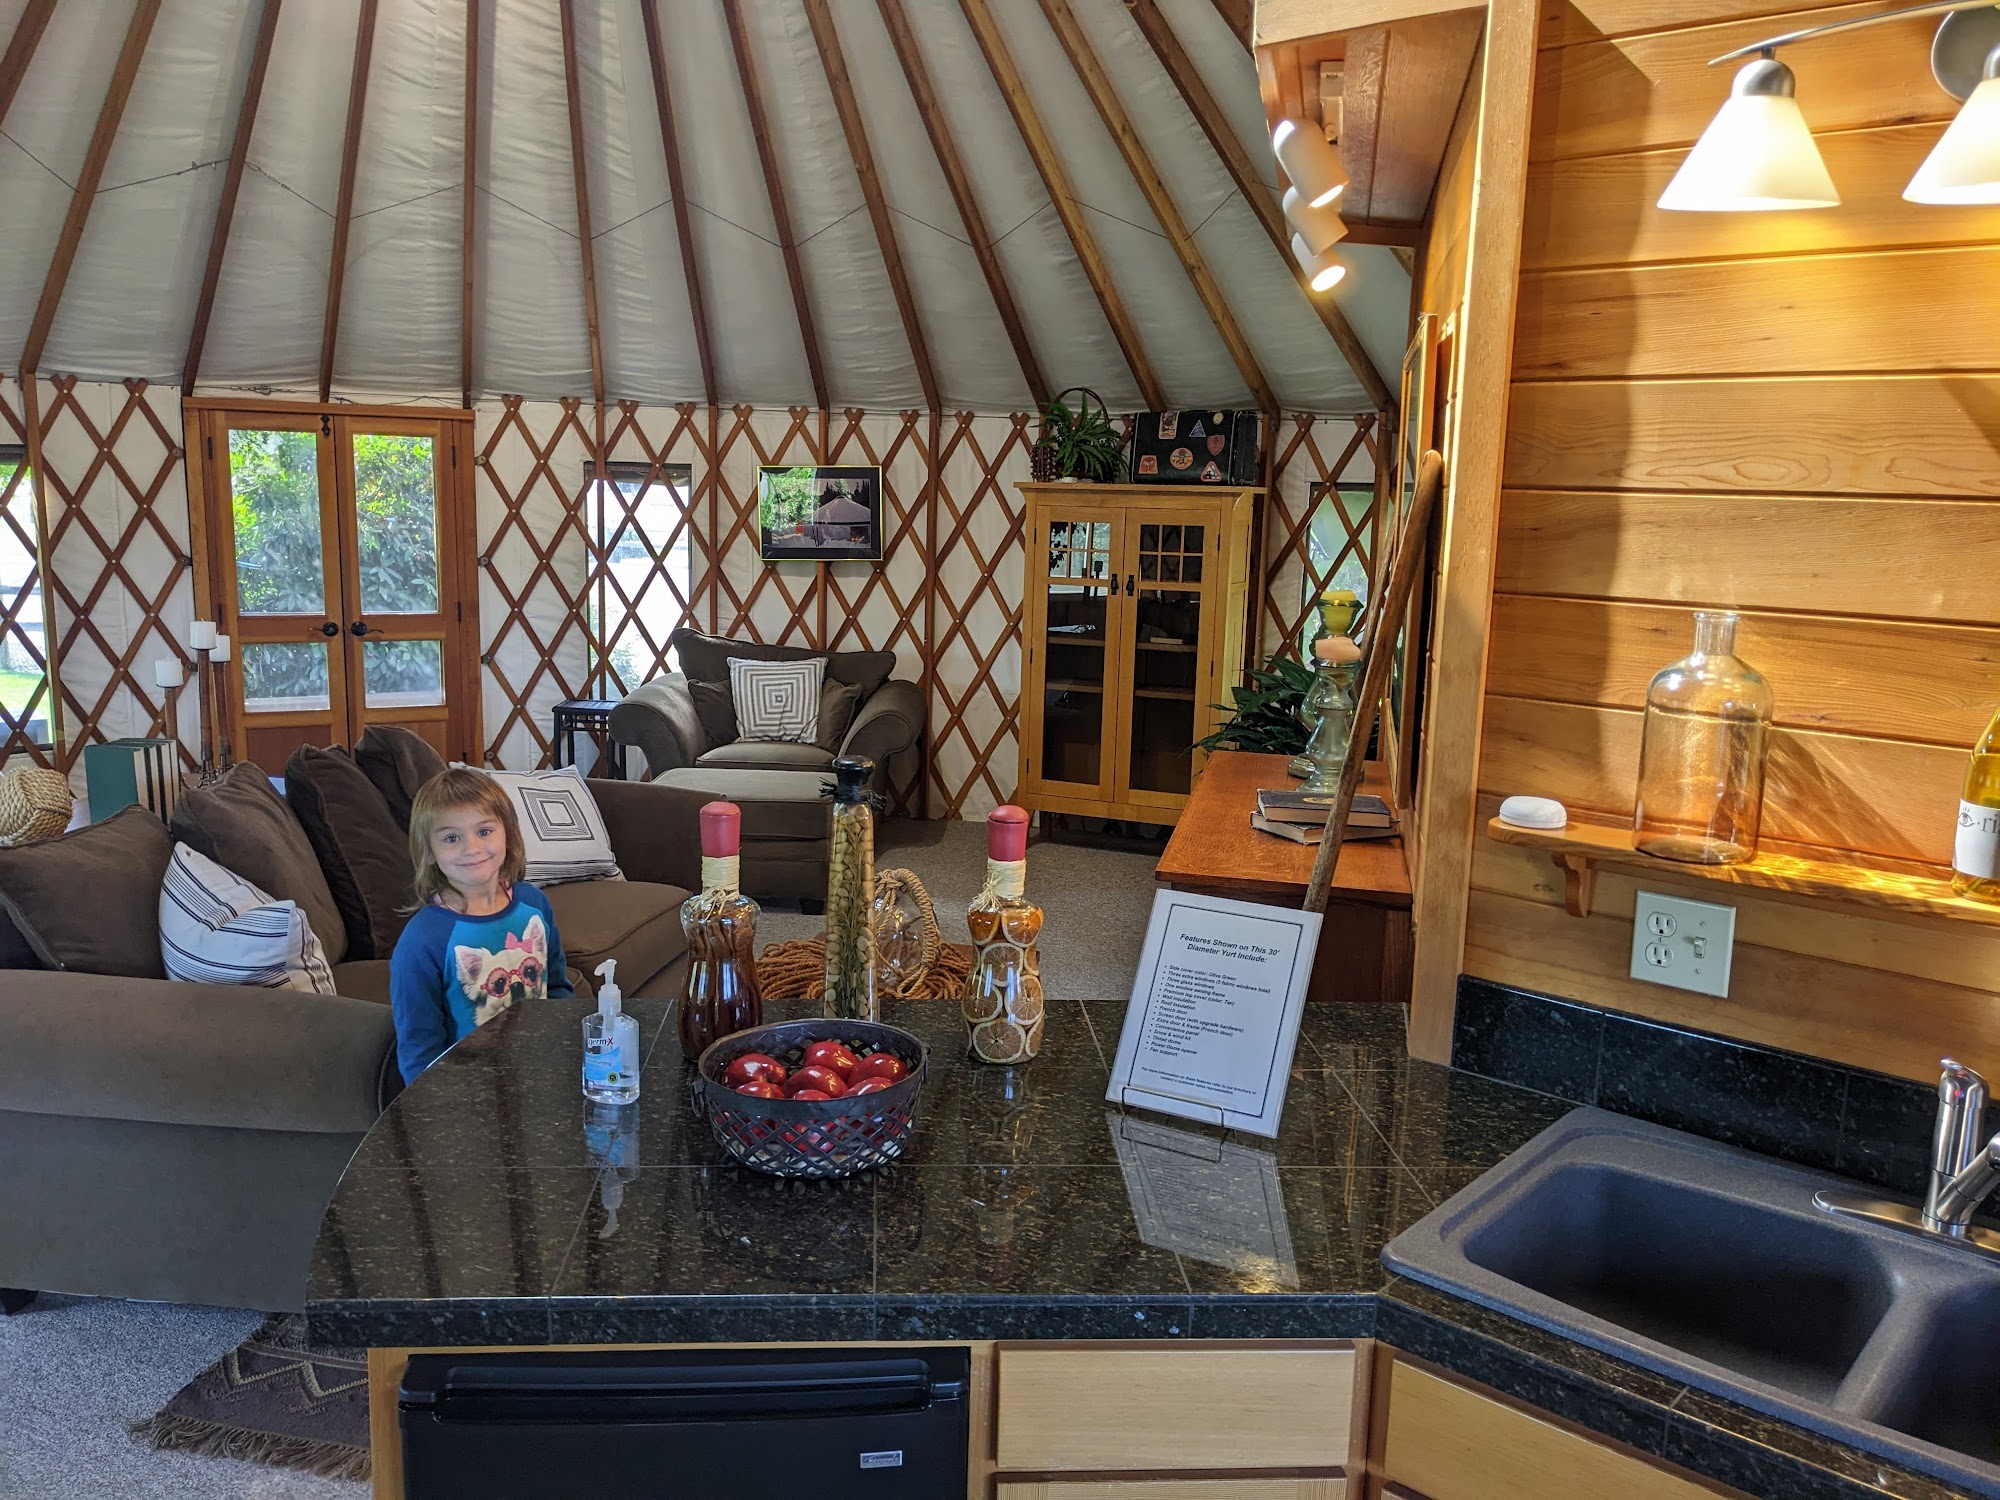 Pacific Yurts 77456 OR-99, Cottage Grove Oregon 97424